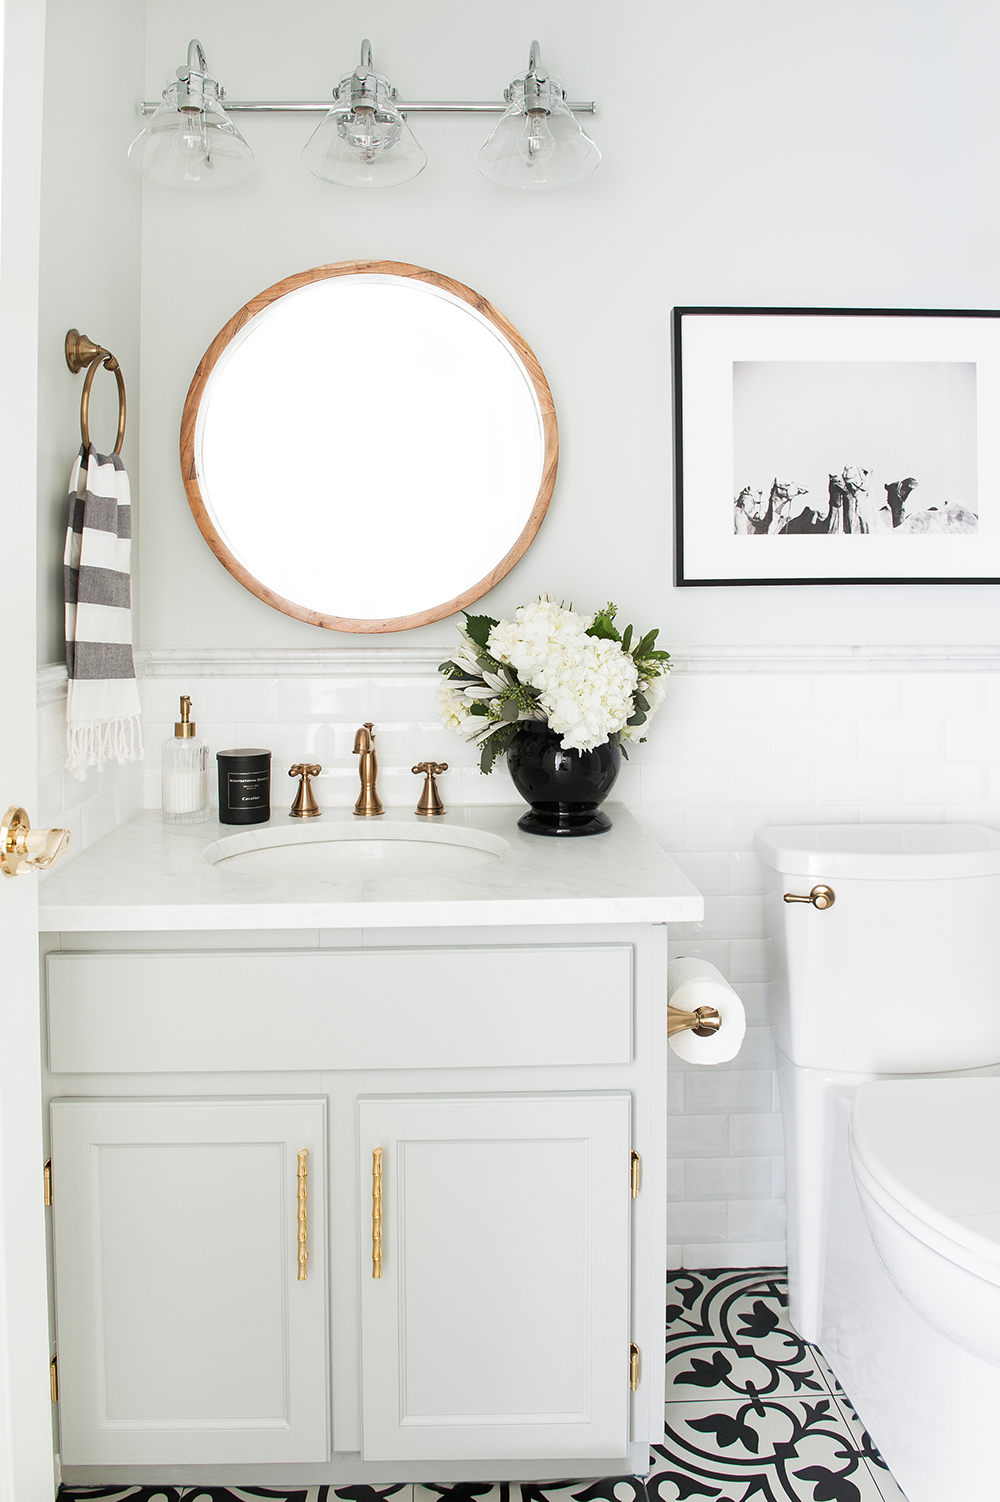 Monochromatic bathroom punched up with black and brass accents.